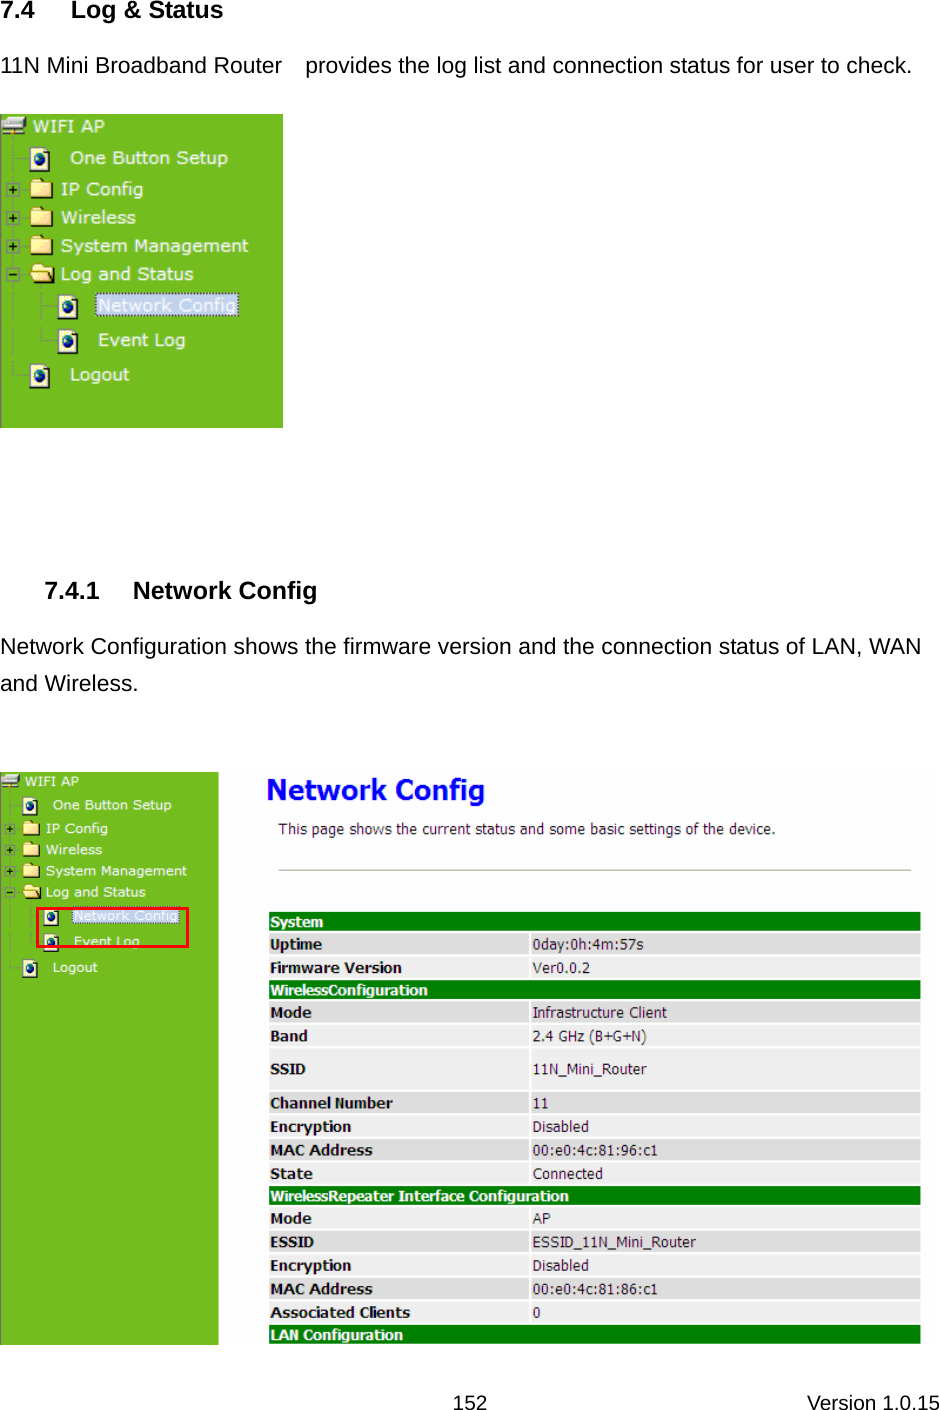 Version 1.0.15 152 7.4  Log &amp; Status 11N Mini Broadband Router    provides the log list and connection status for user to check.   7.4.1 Network Config Network Configuration shows the firmware version and the connection status of LAN, WAN and Wireless.   